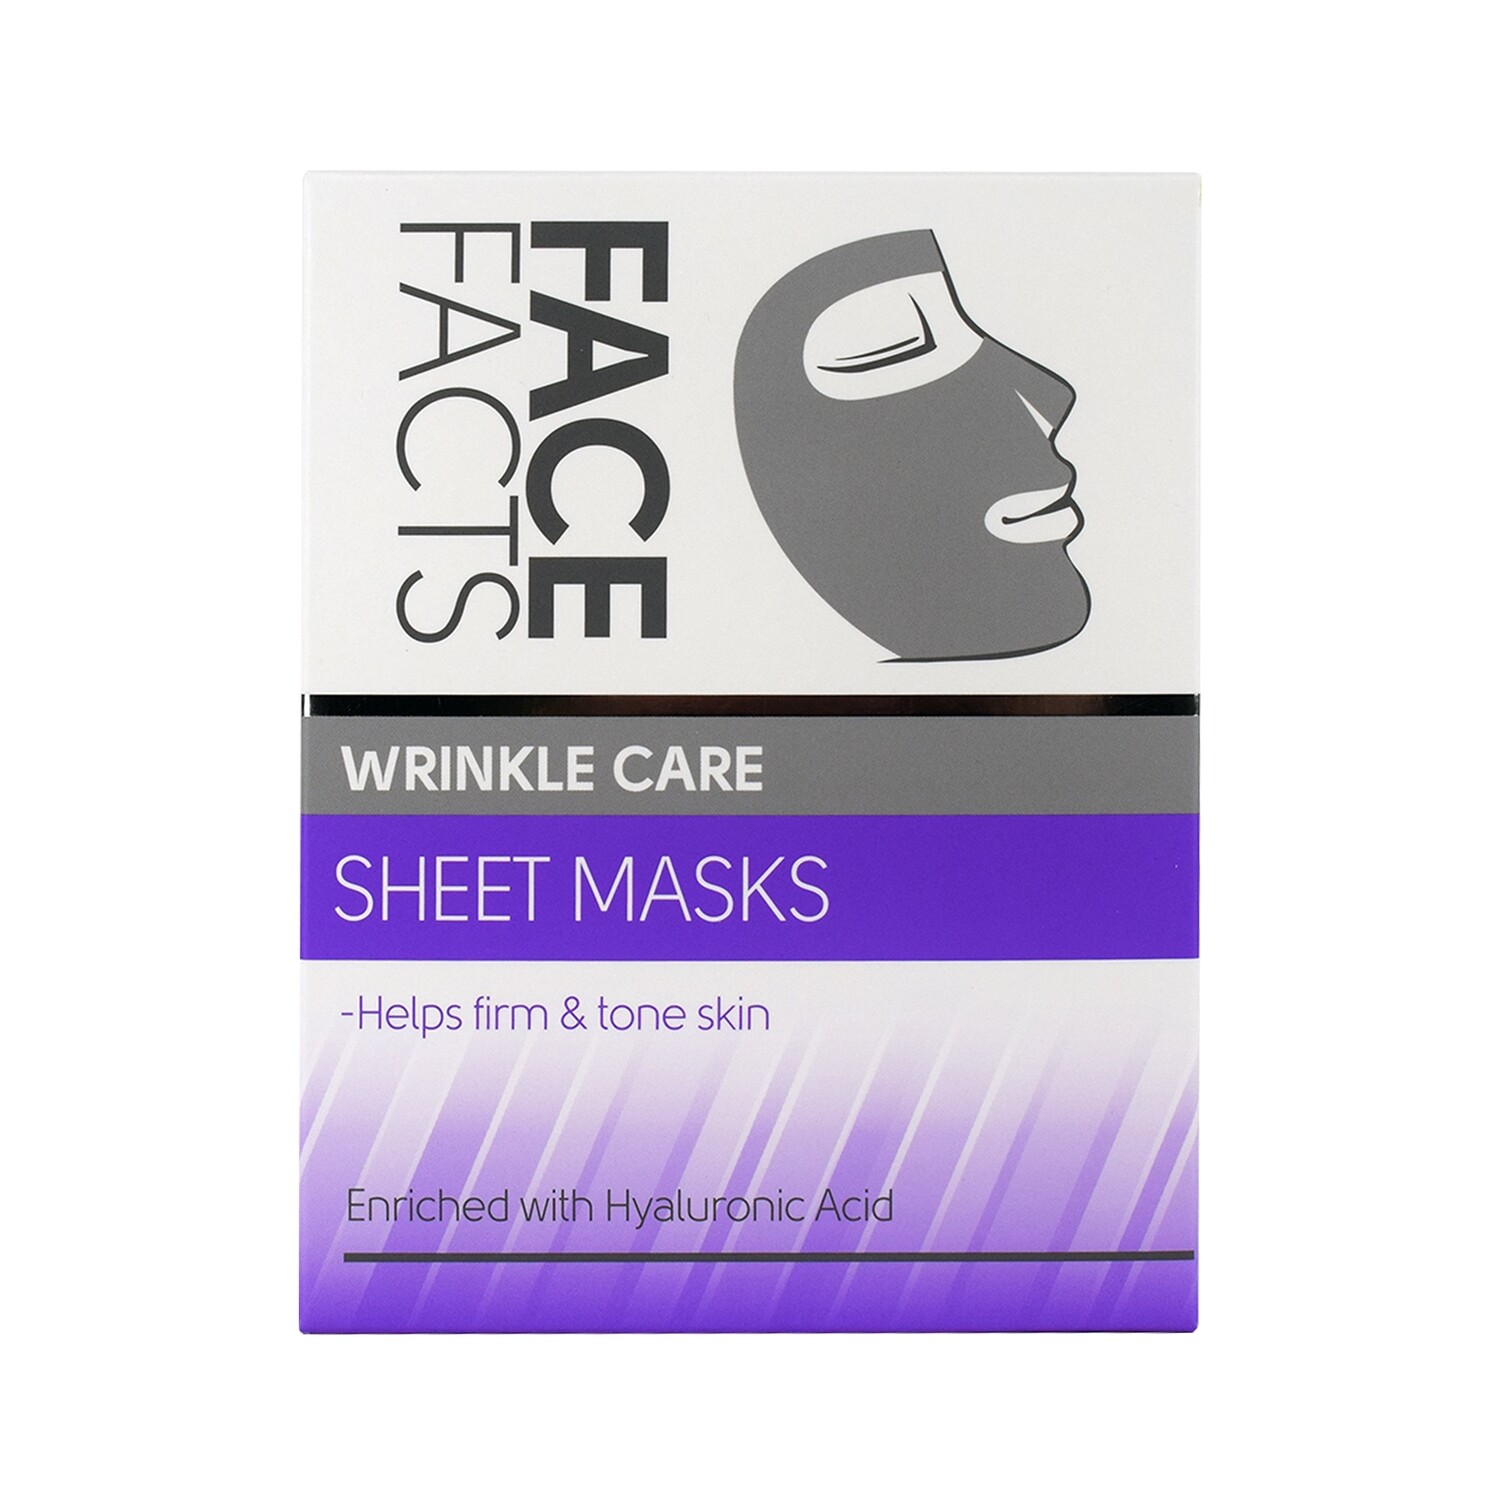 Face Facts Sheet Mask - Wrinkle Care, 2 Sheets